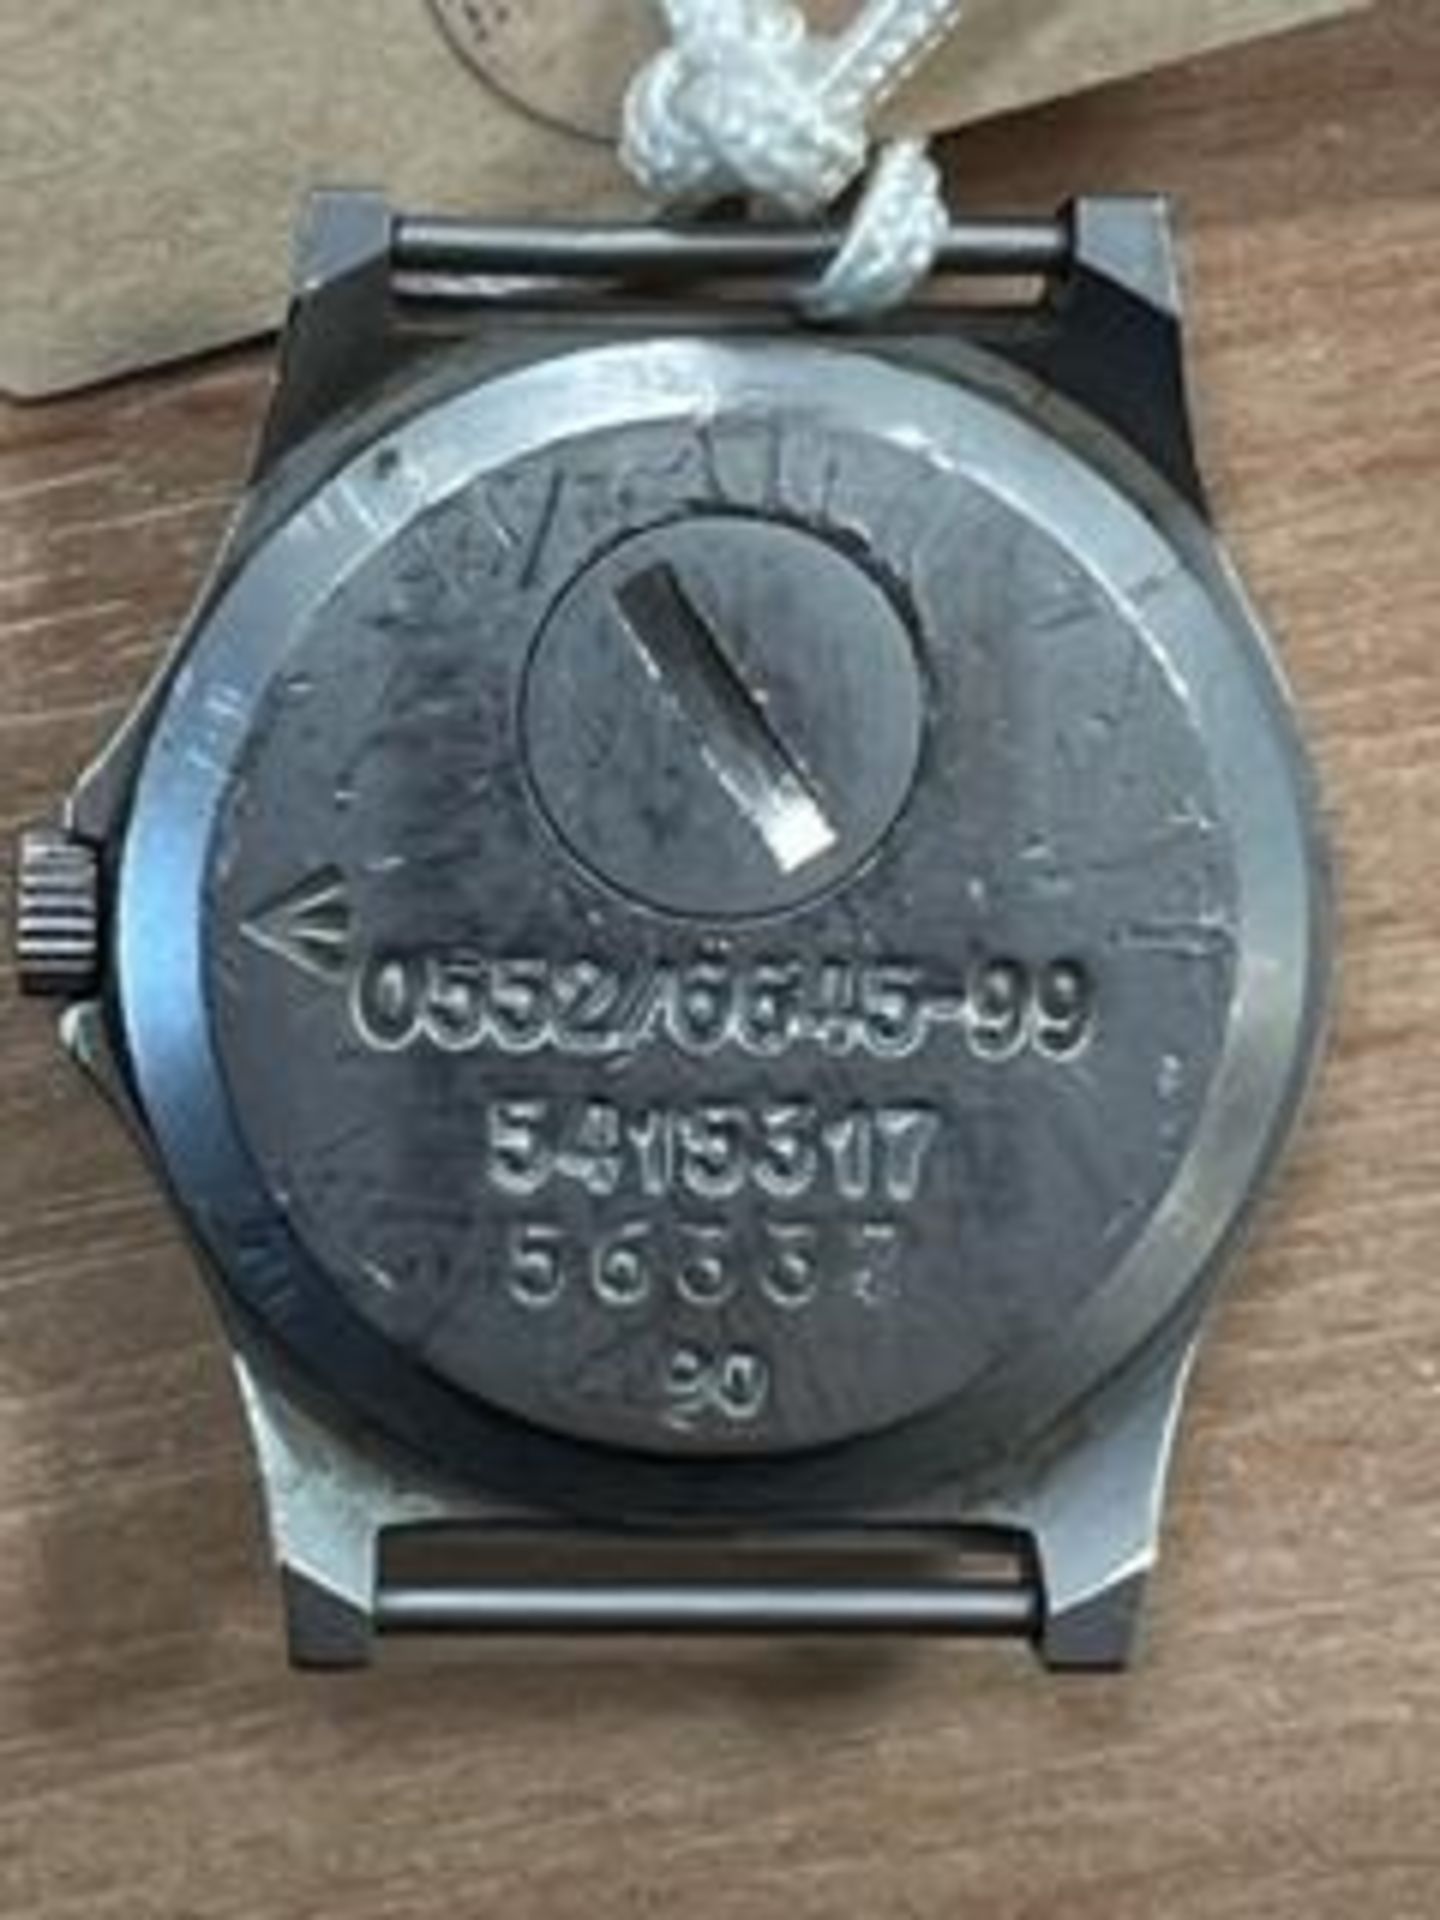 CWC 0552 ROYAL MARINES SERVICE WATCH NATO MARKS DATE 1990 ** GULF WAR** - Image 7 of 9